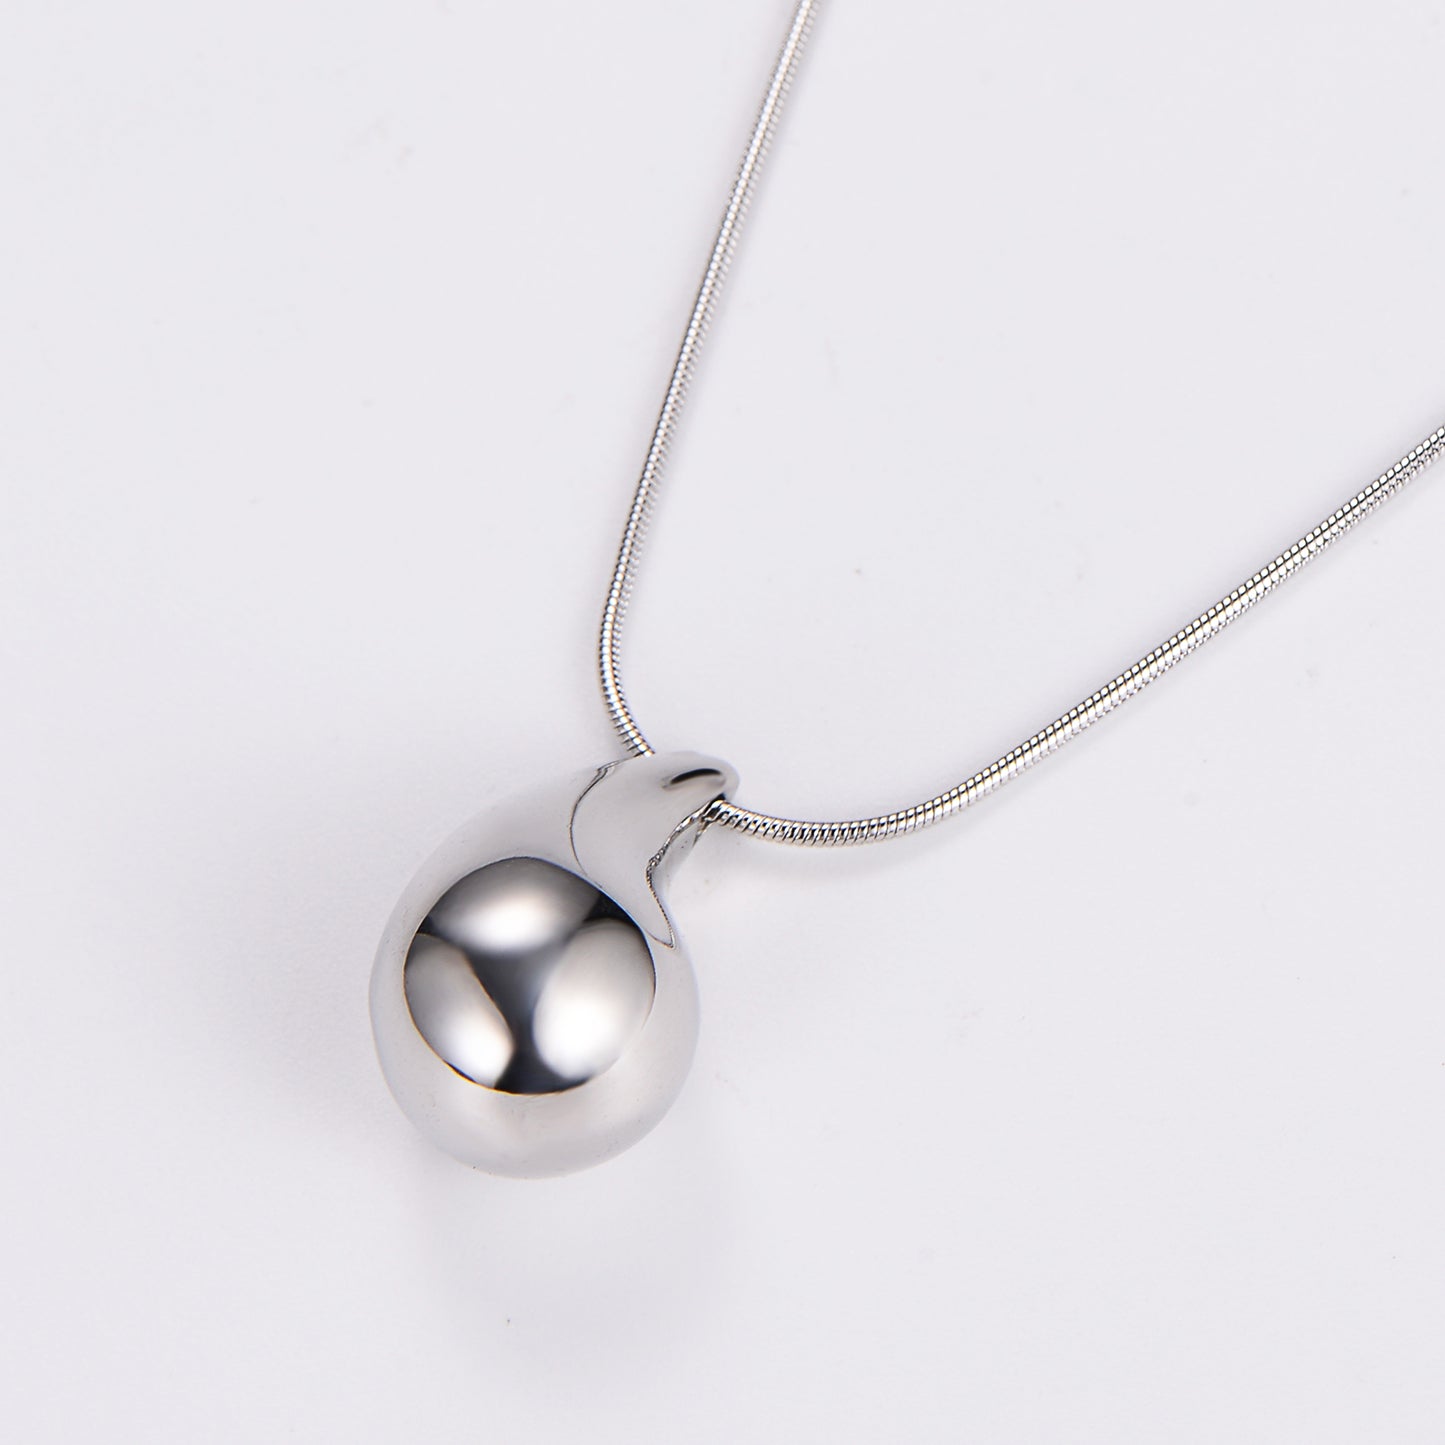 Stainless Steel Elegant Water Droplets Pendant Necklace